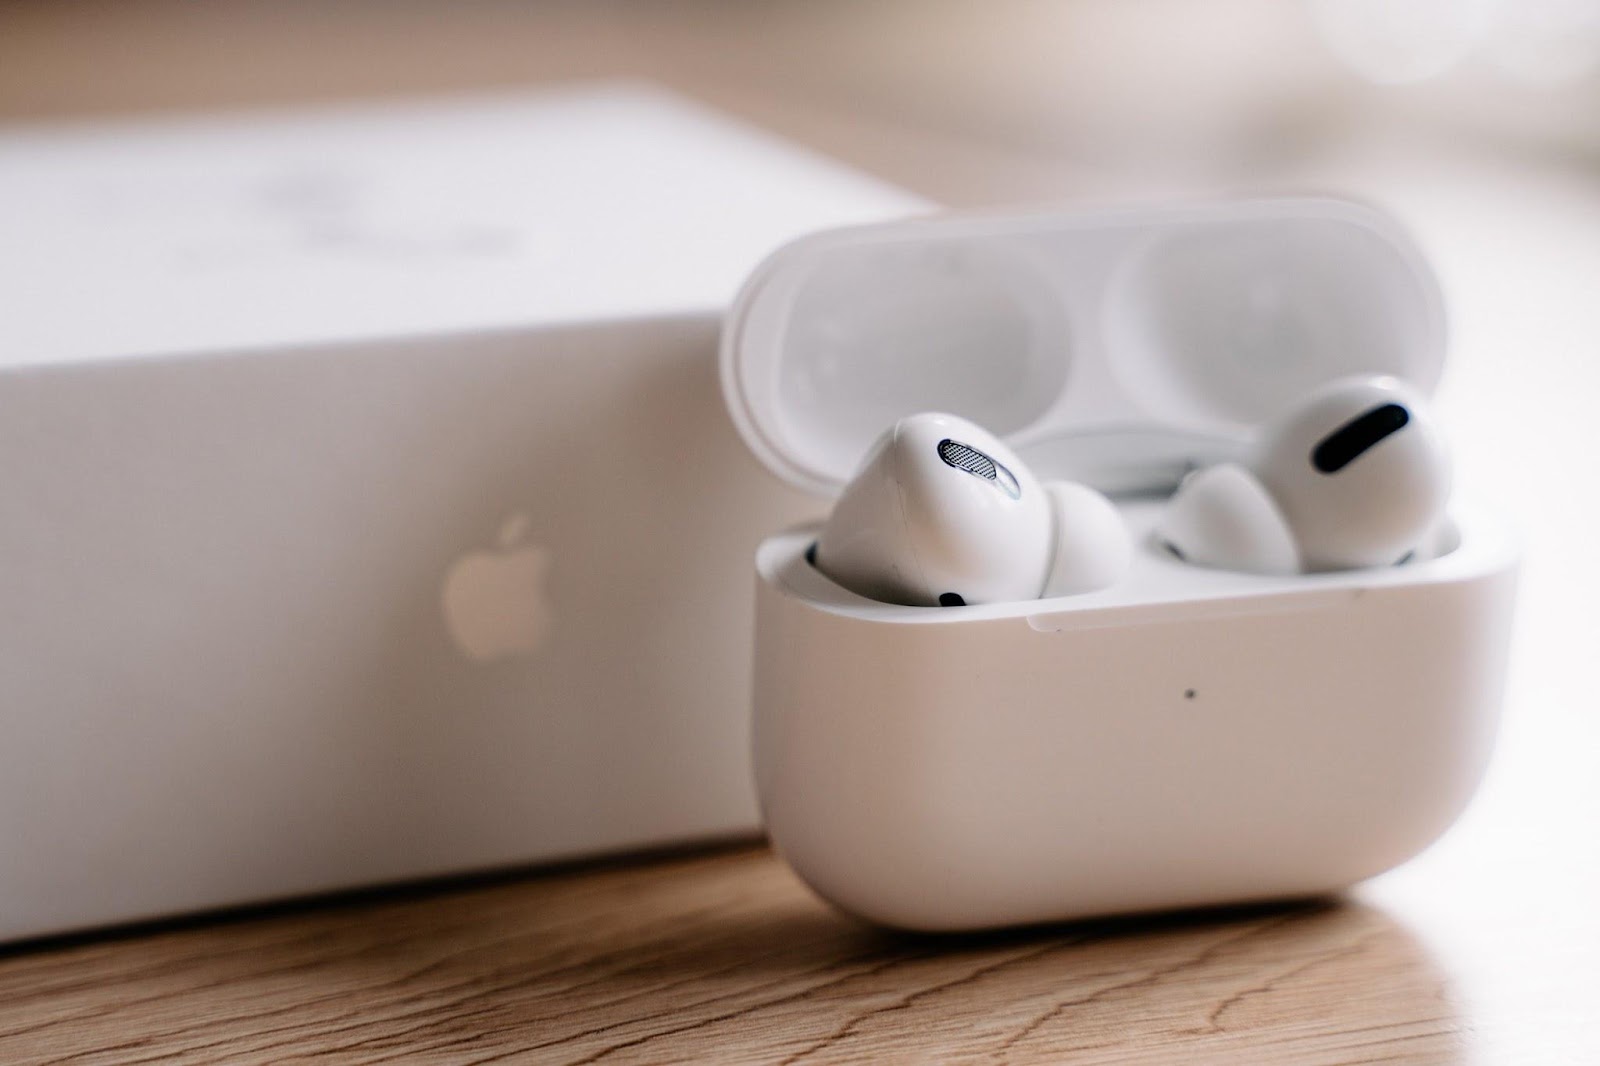 This image shows the AirPods Pro 2 with its box.